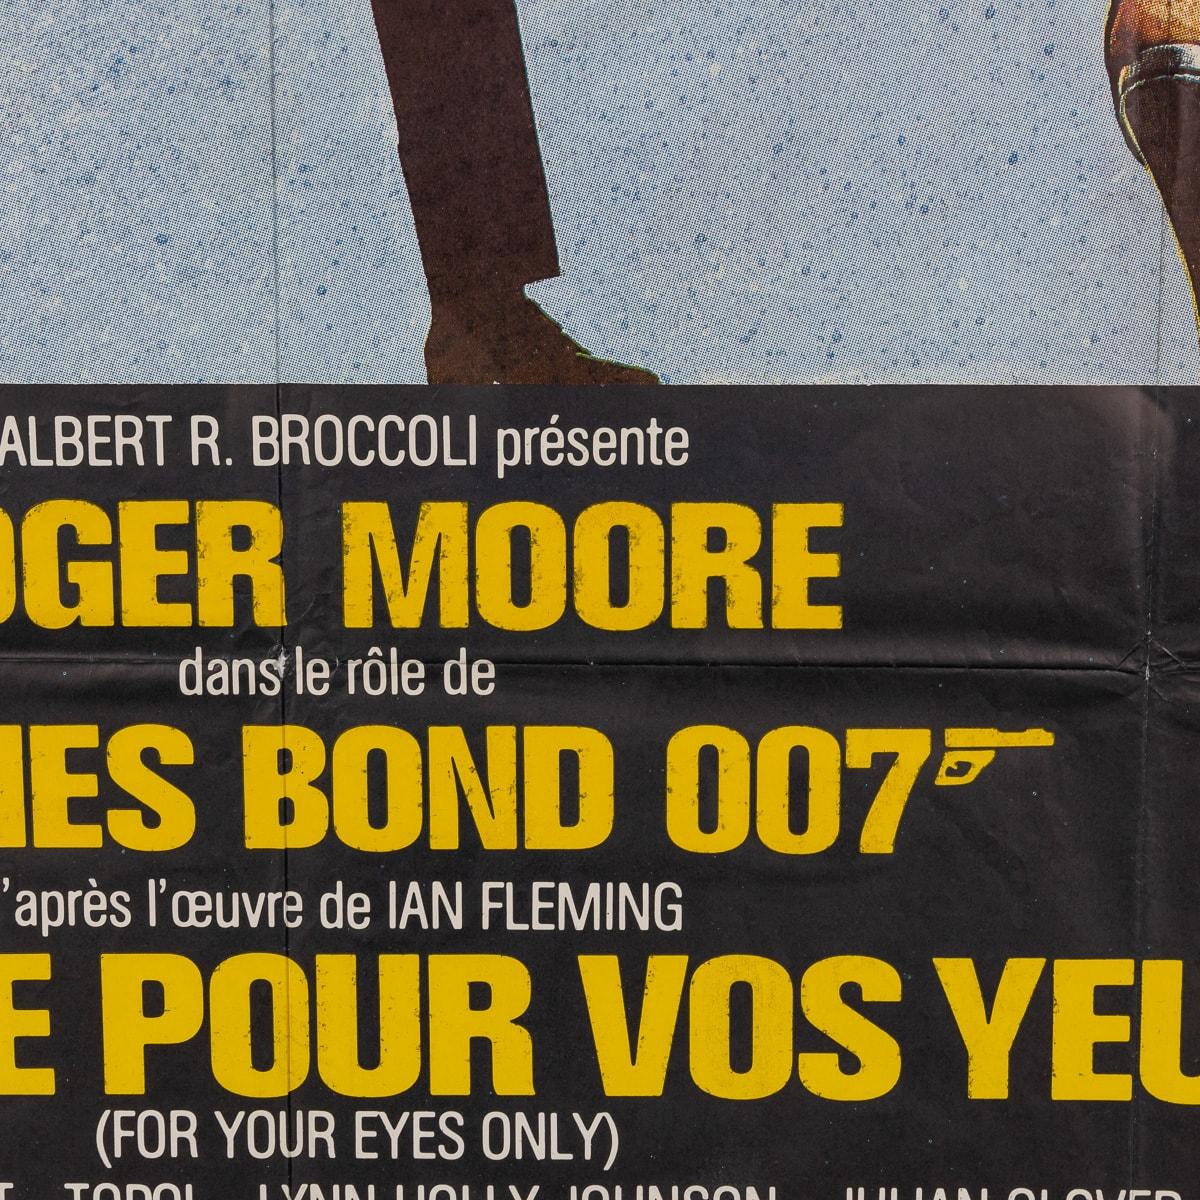 Original French Release James Bond 'For Your Eyes Only' Poster, c.1983 12